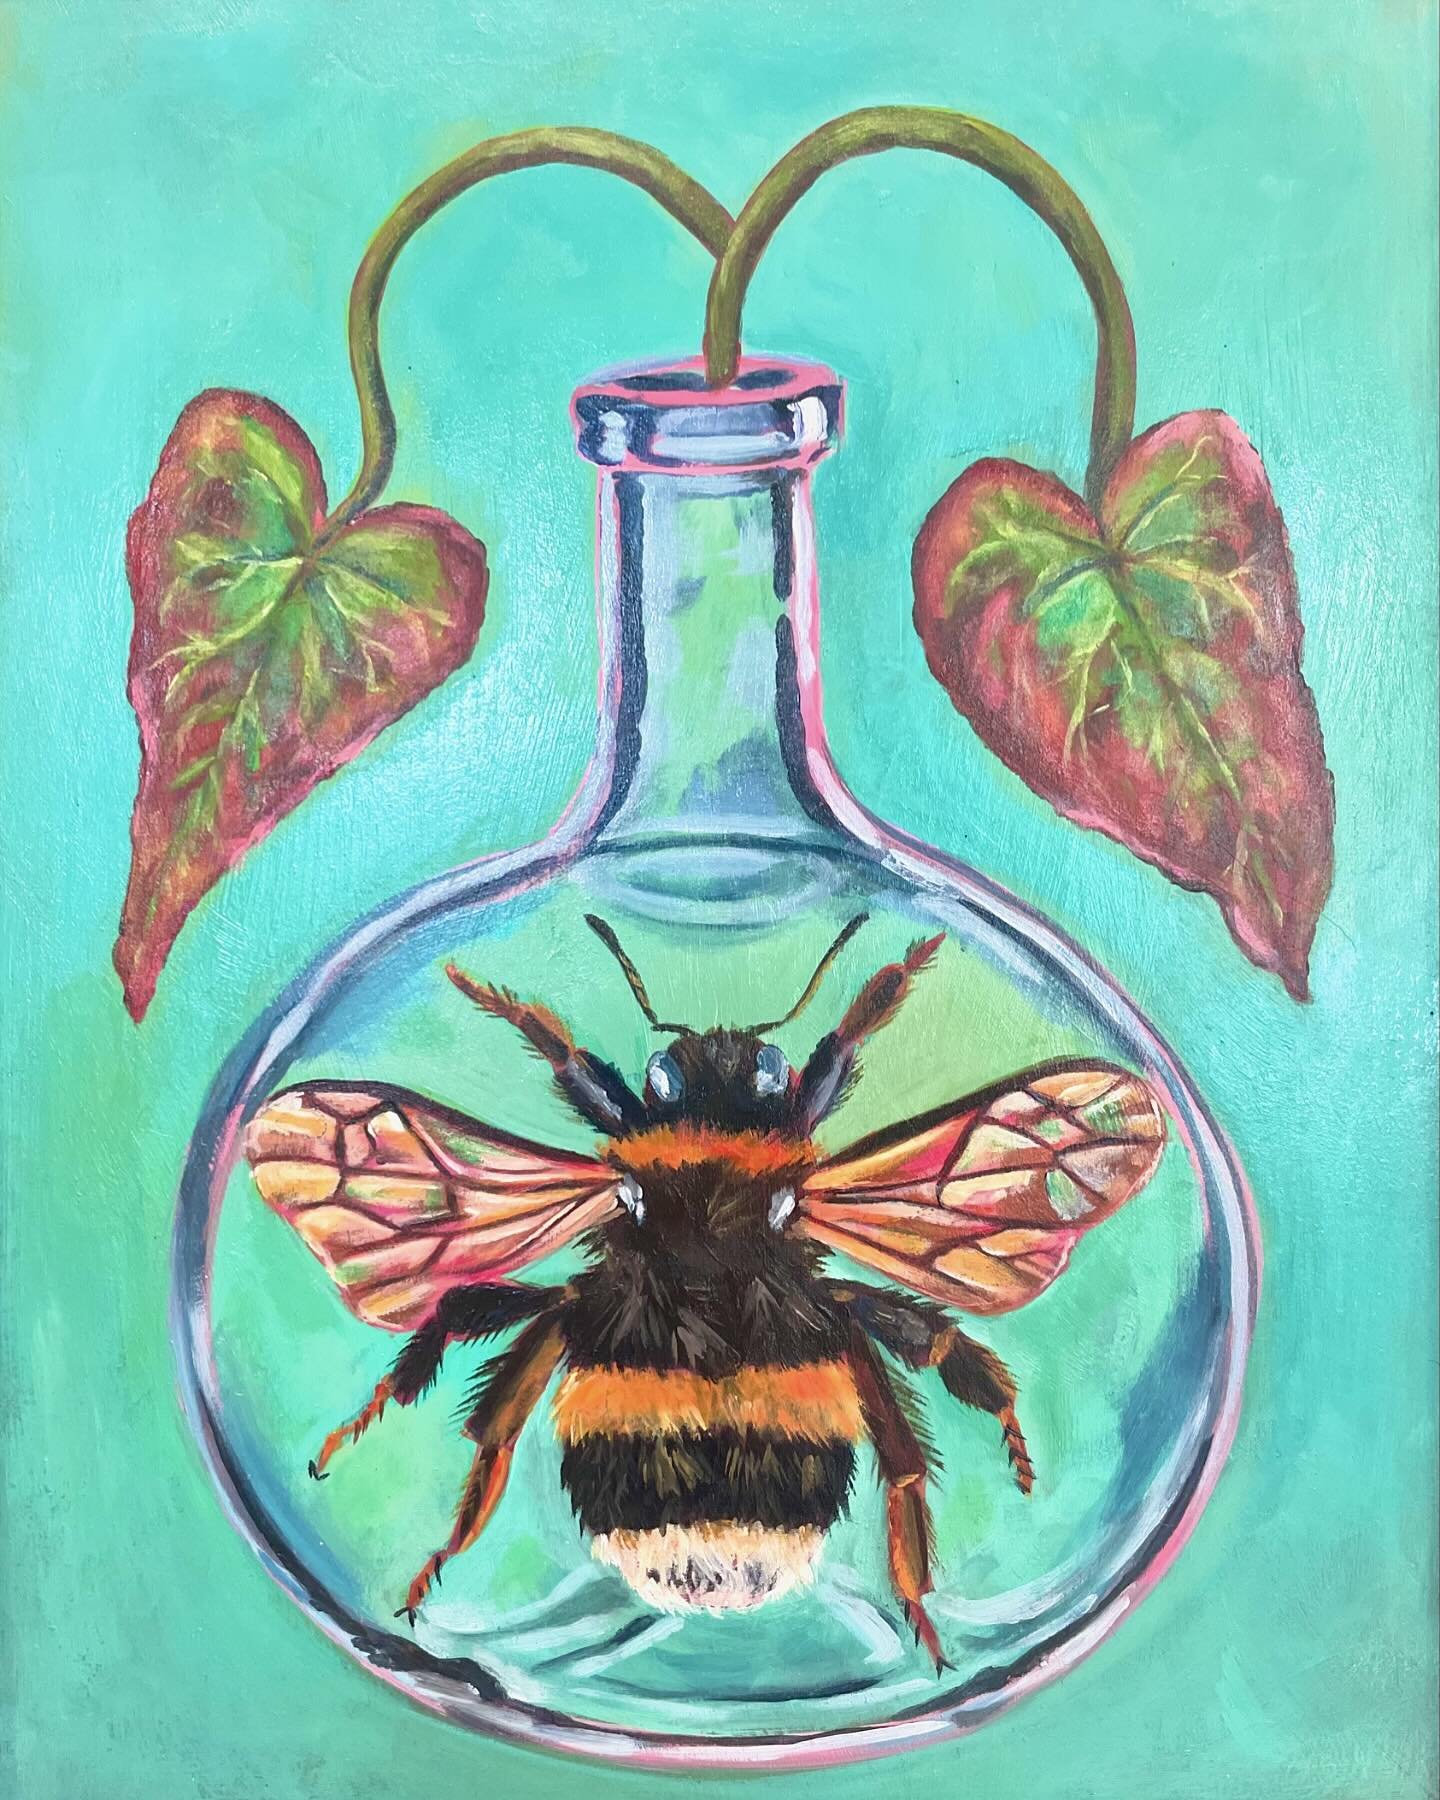 some recent oil paintings, inspired by our amazing pollinator allies and alchemical manuscript illustrations of magickal bottles. i&rsquo;ve also been enamored with hot pink and wanted to play with this punchy and vibrant color.

see them in-person a